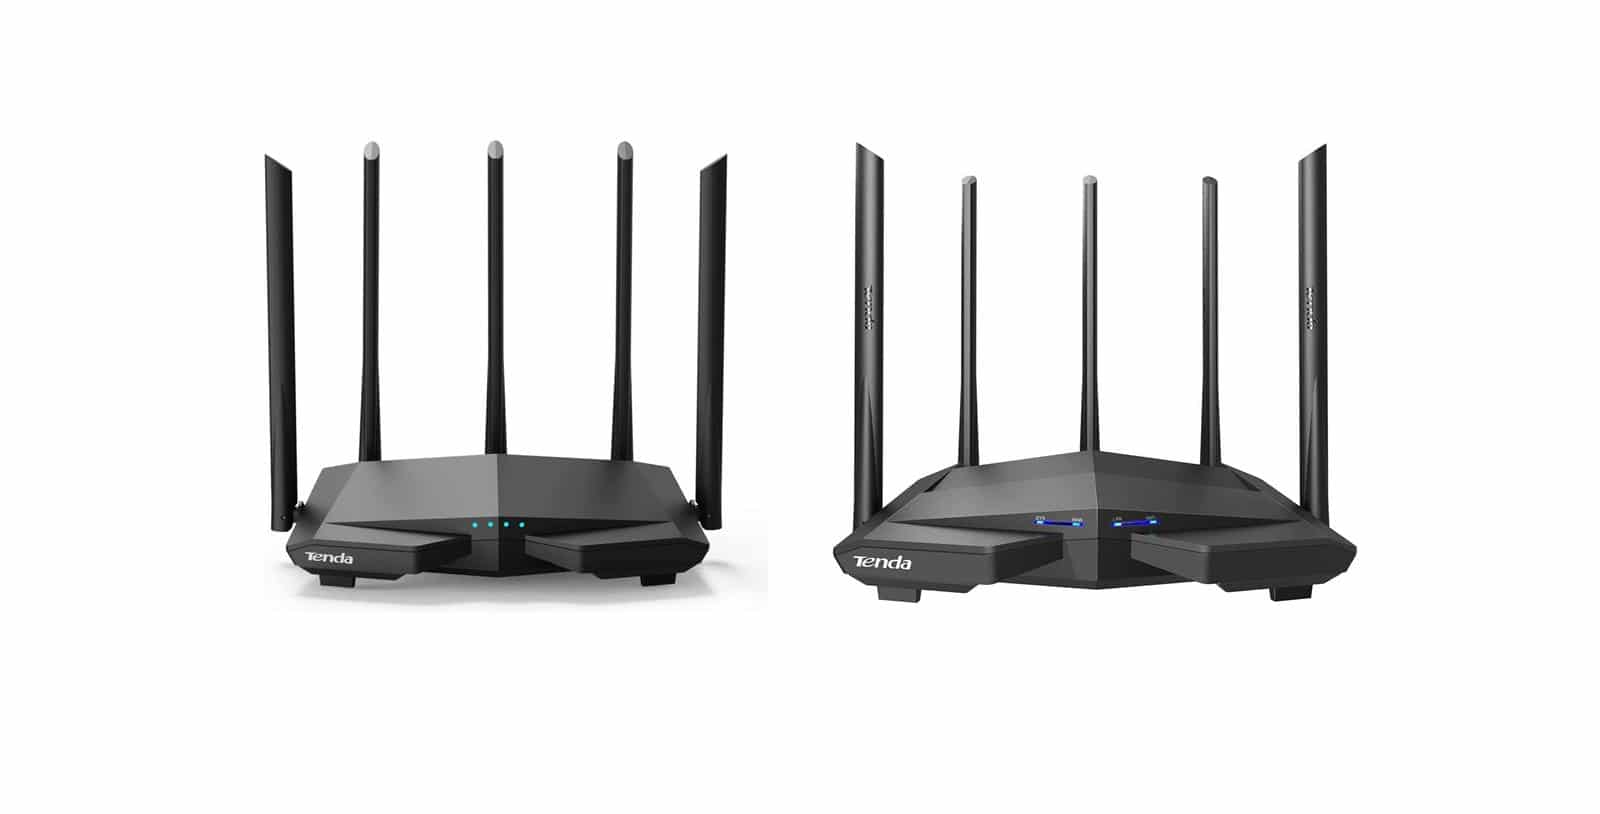 Are you looking for a new home router?  Check out the Tenda AC7 and AC11 models